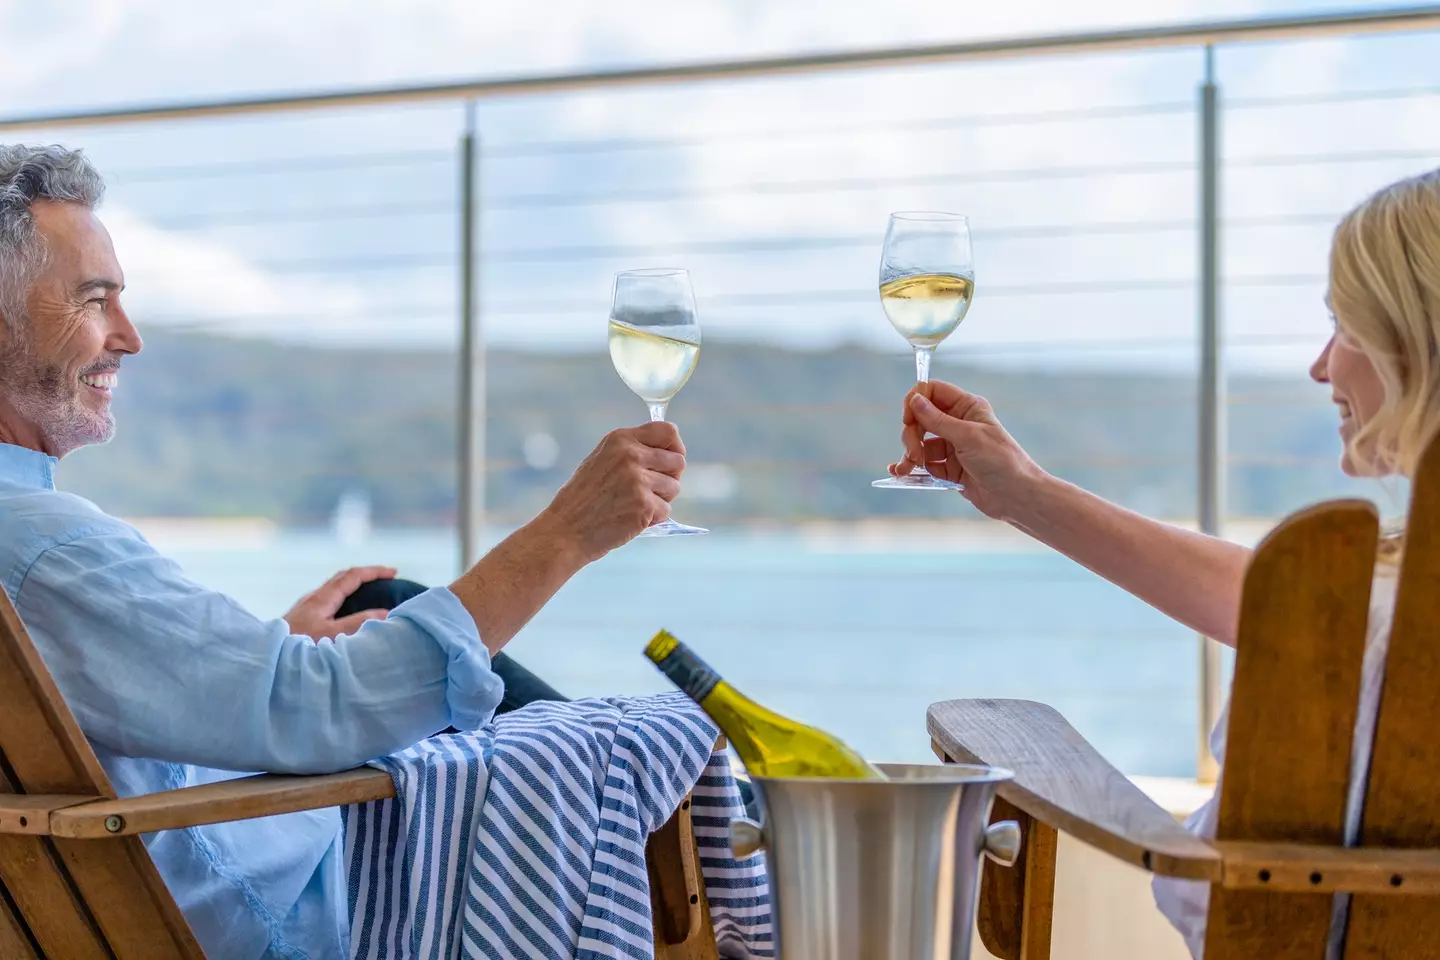 Guests will only be allowed to bring up to one litre of wine or Champagne on board. (courtneyk / Getty Images)